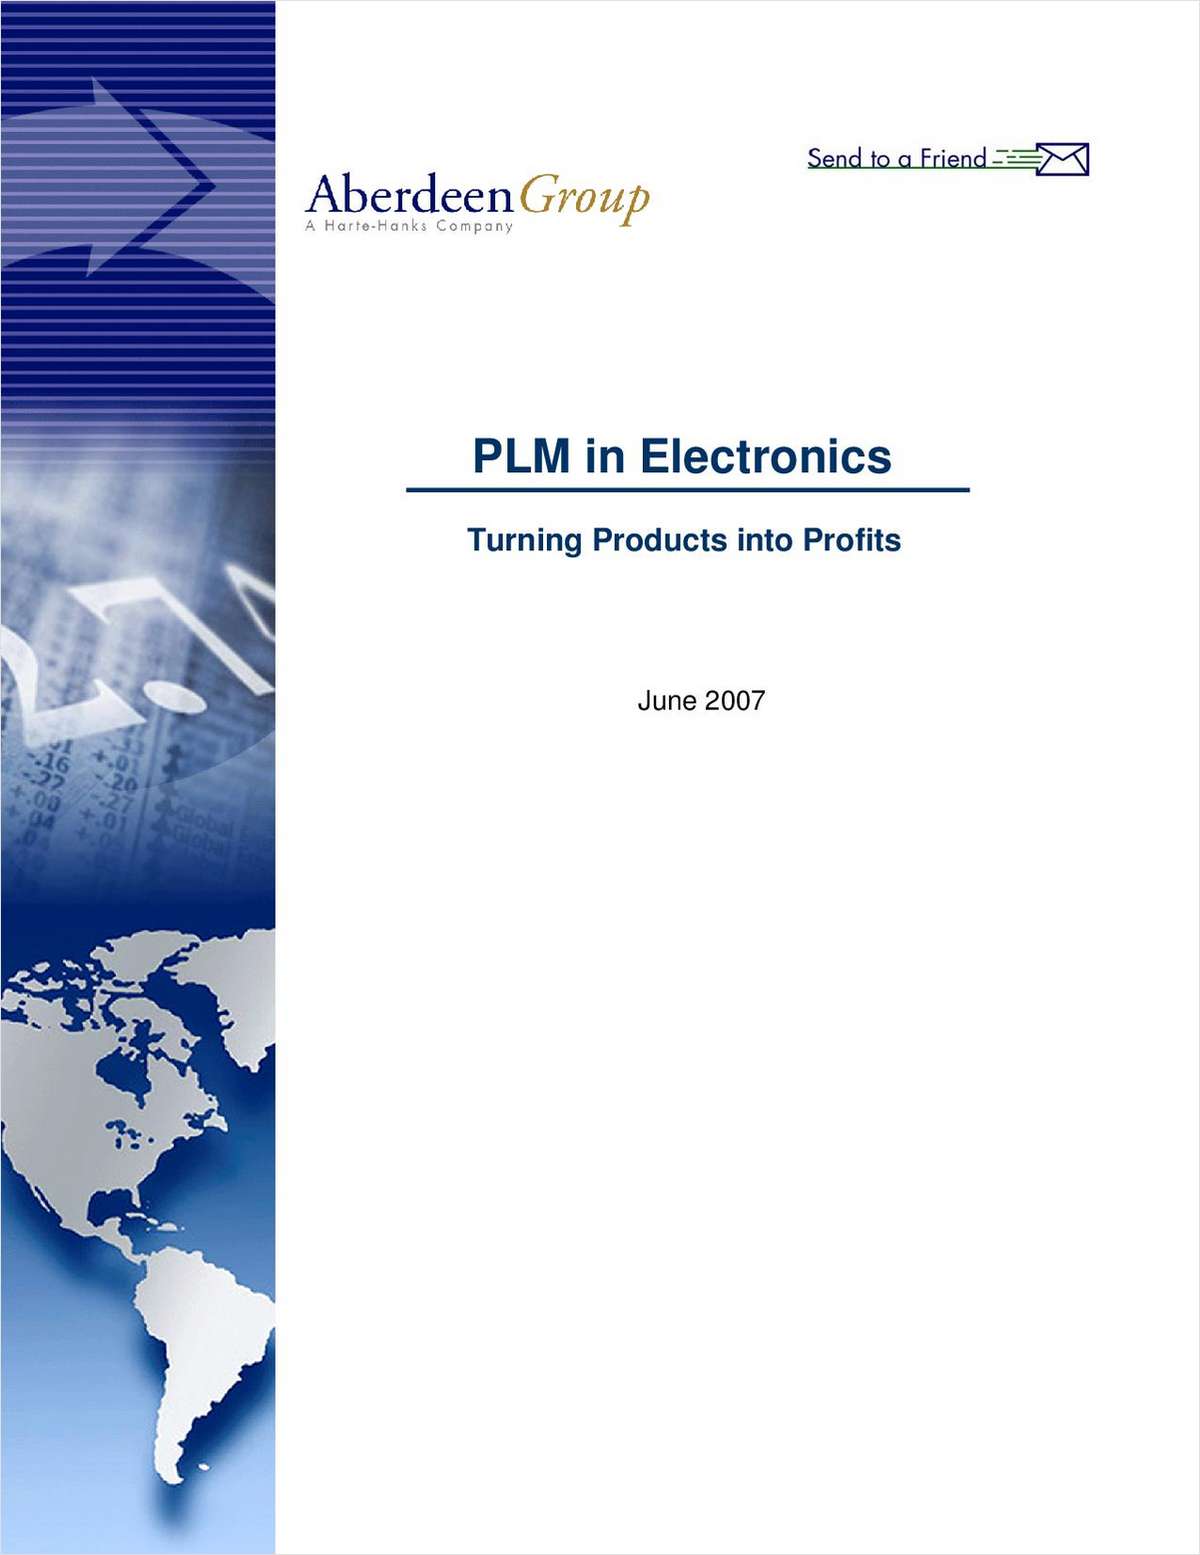 PLM in Electronics Report; Turning Products into Profits